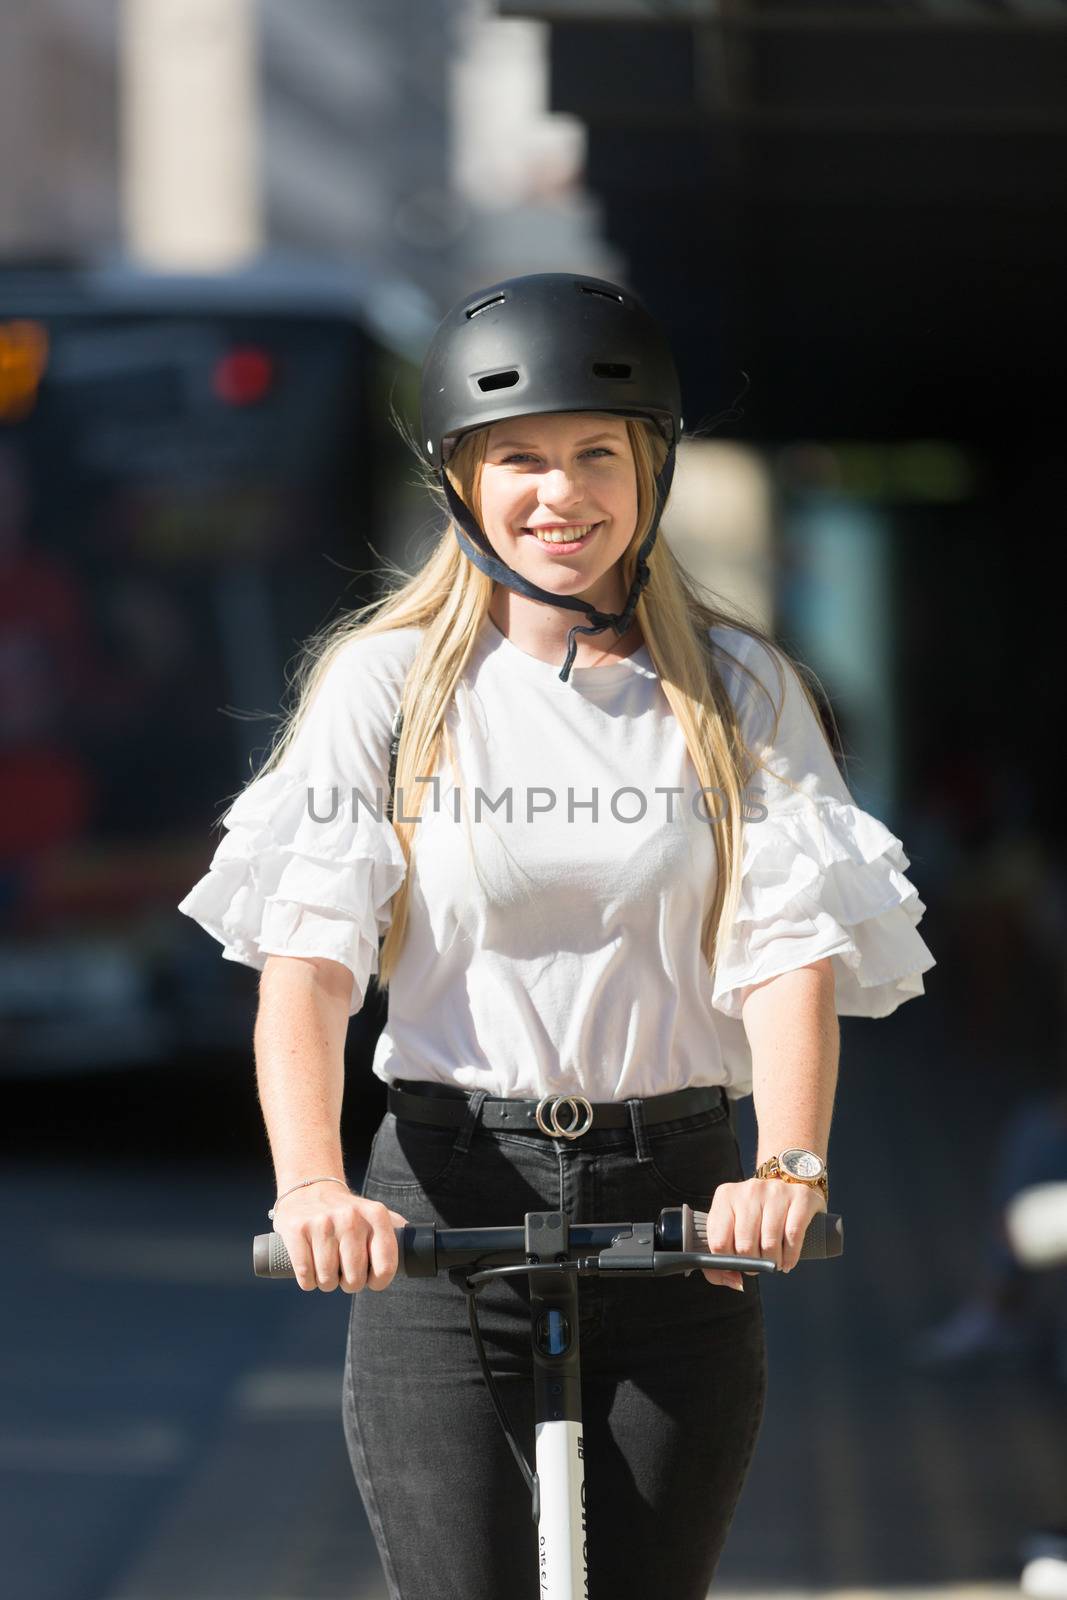 Trendy fashinable teenager, beautiful blonde girl riding public rental electric scooter in urban city environment. Eco-friendly modern public city transport.